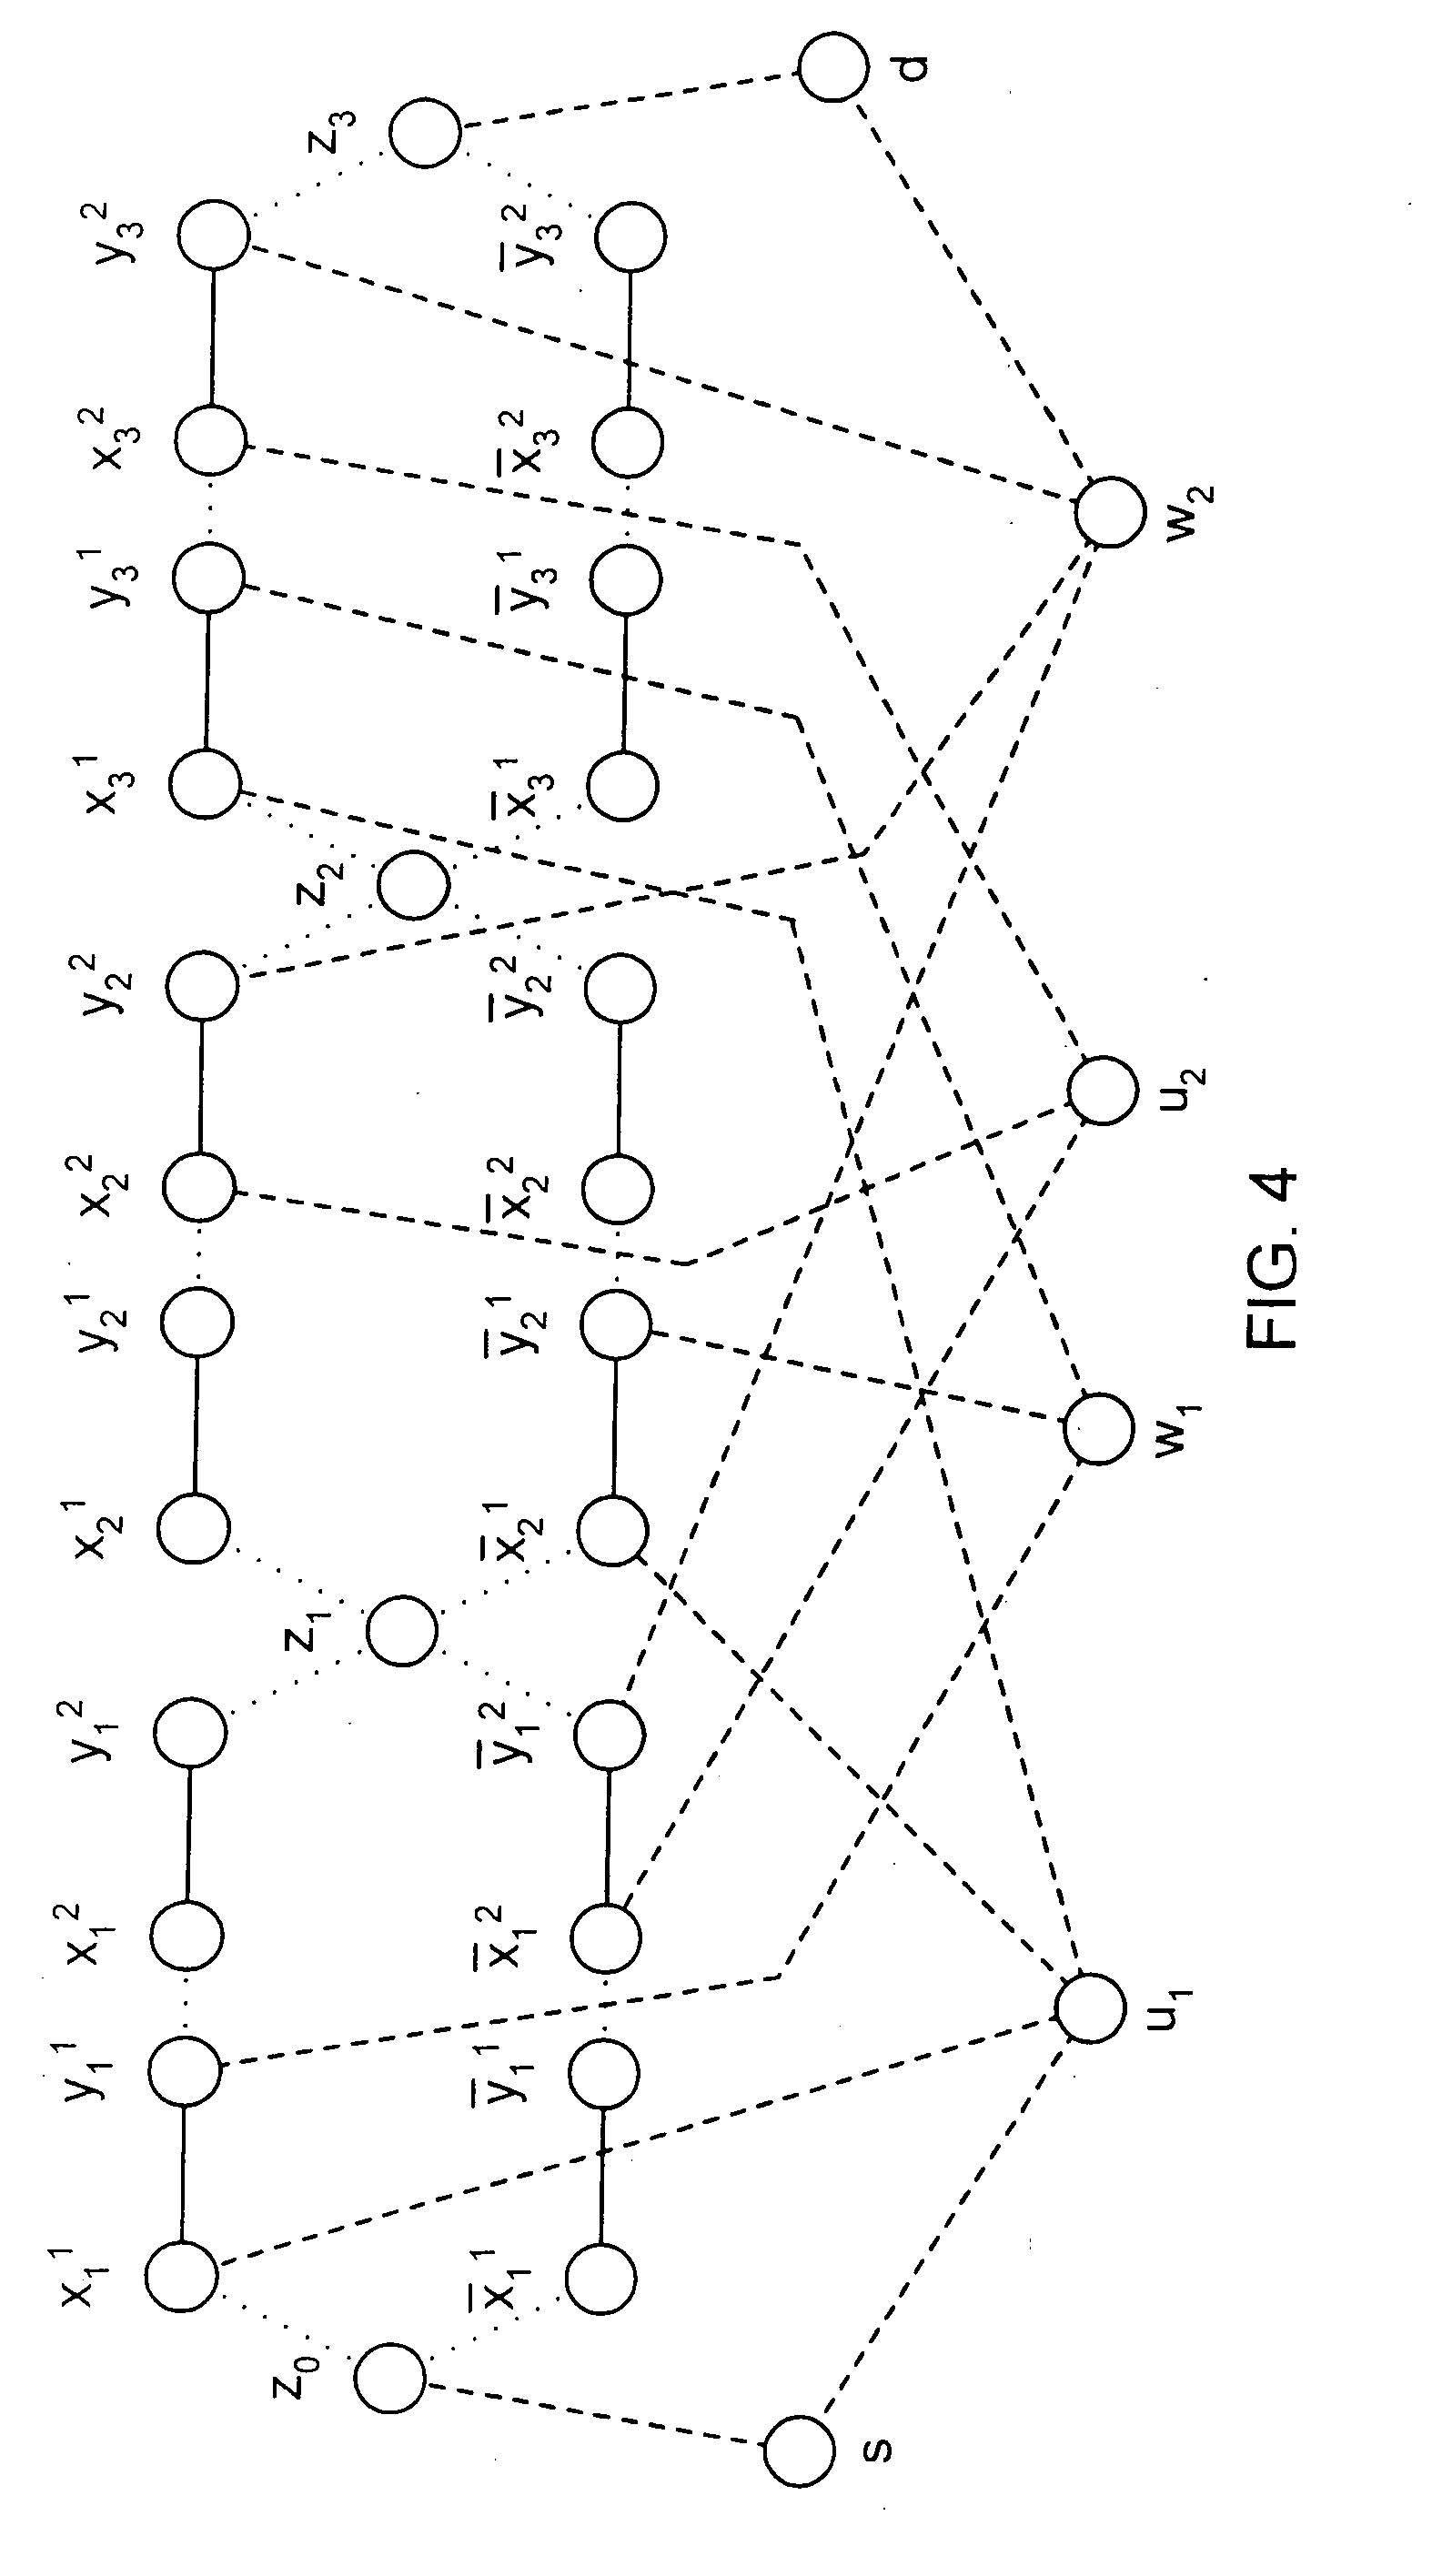 System, method and apparatus for dynamic path protection in networks